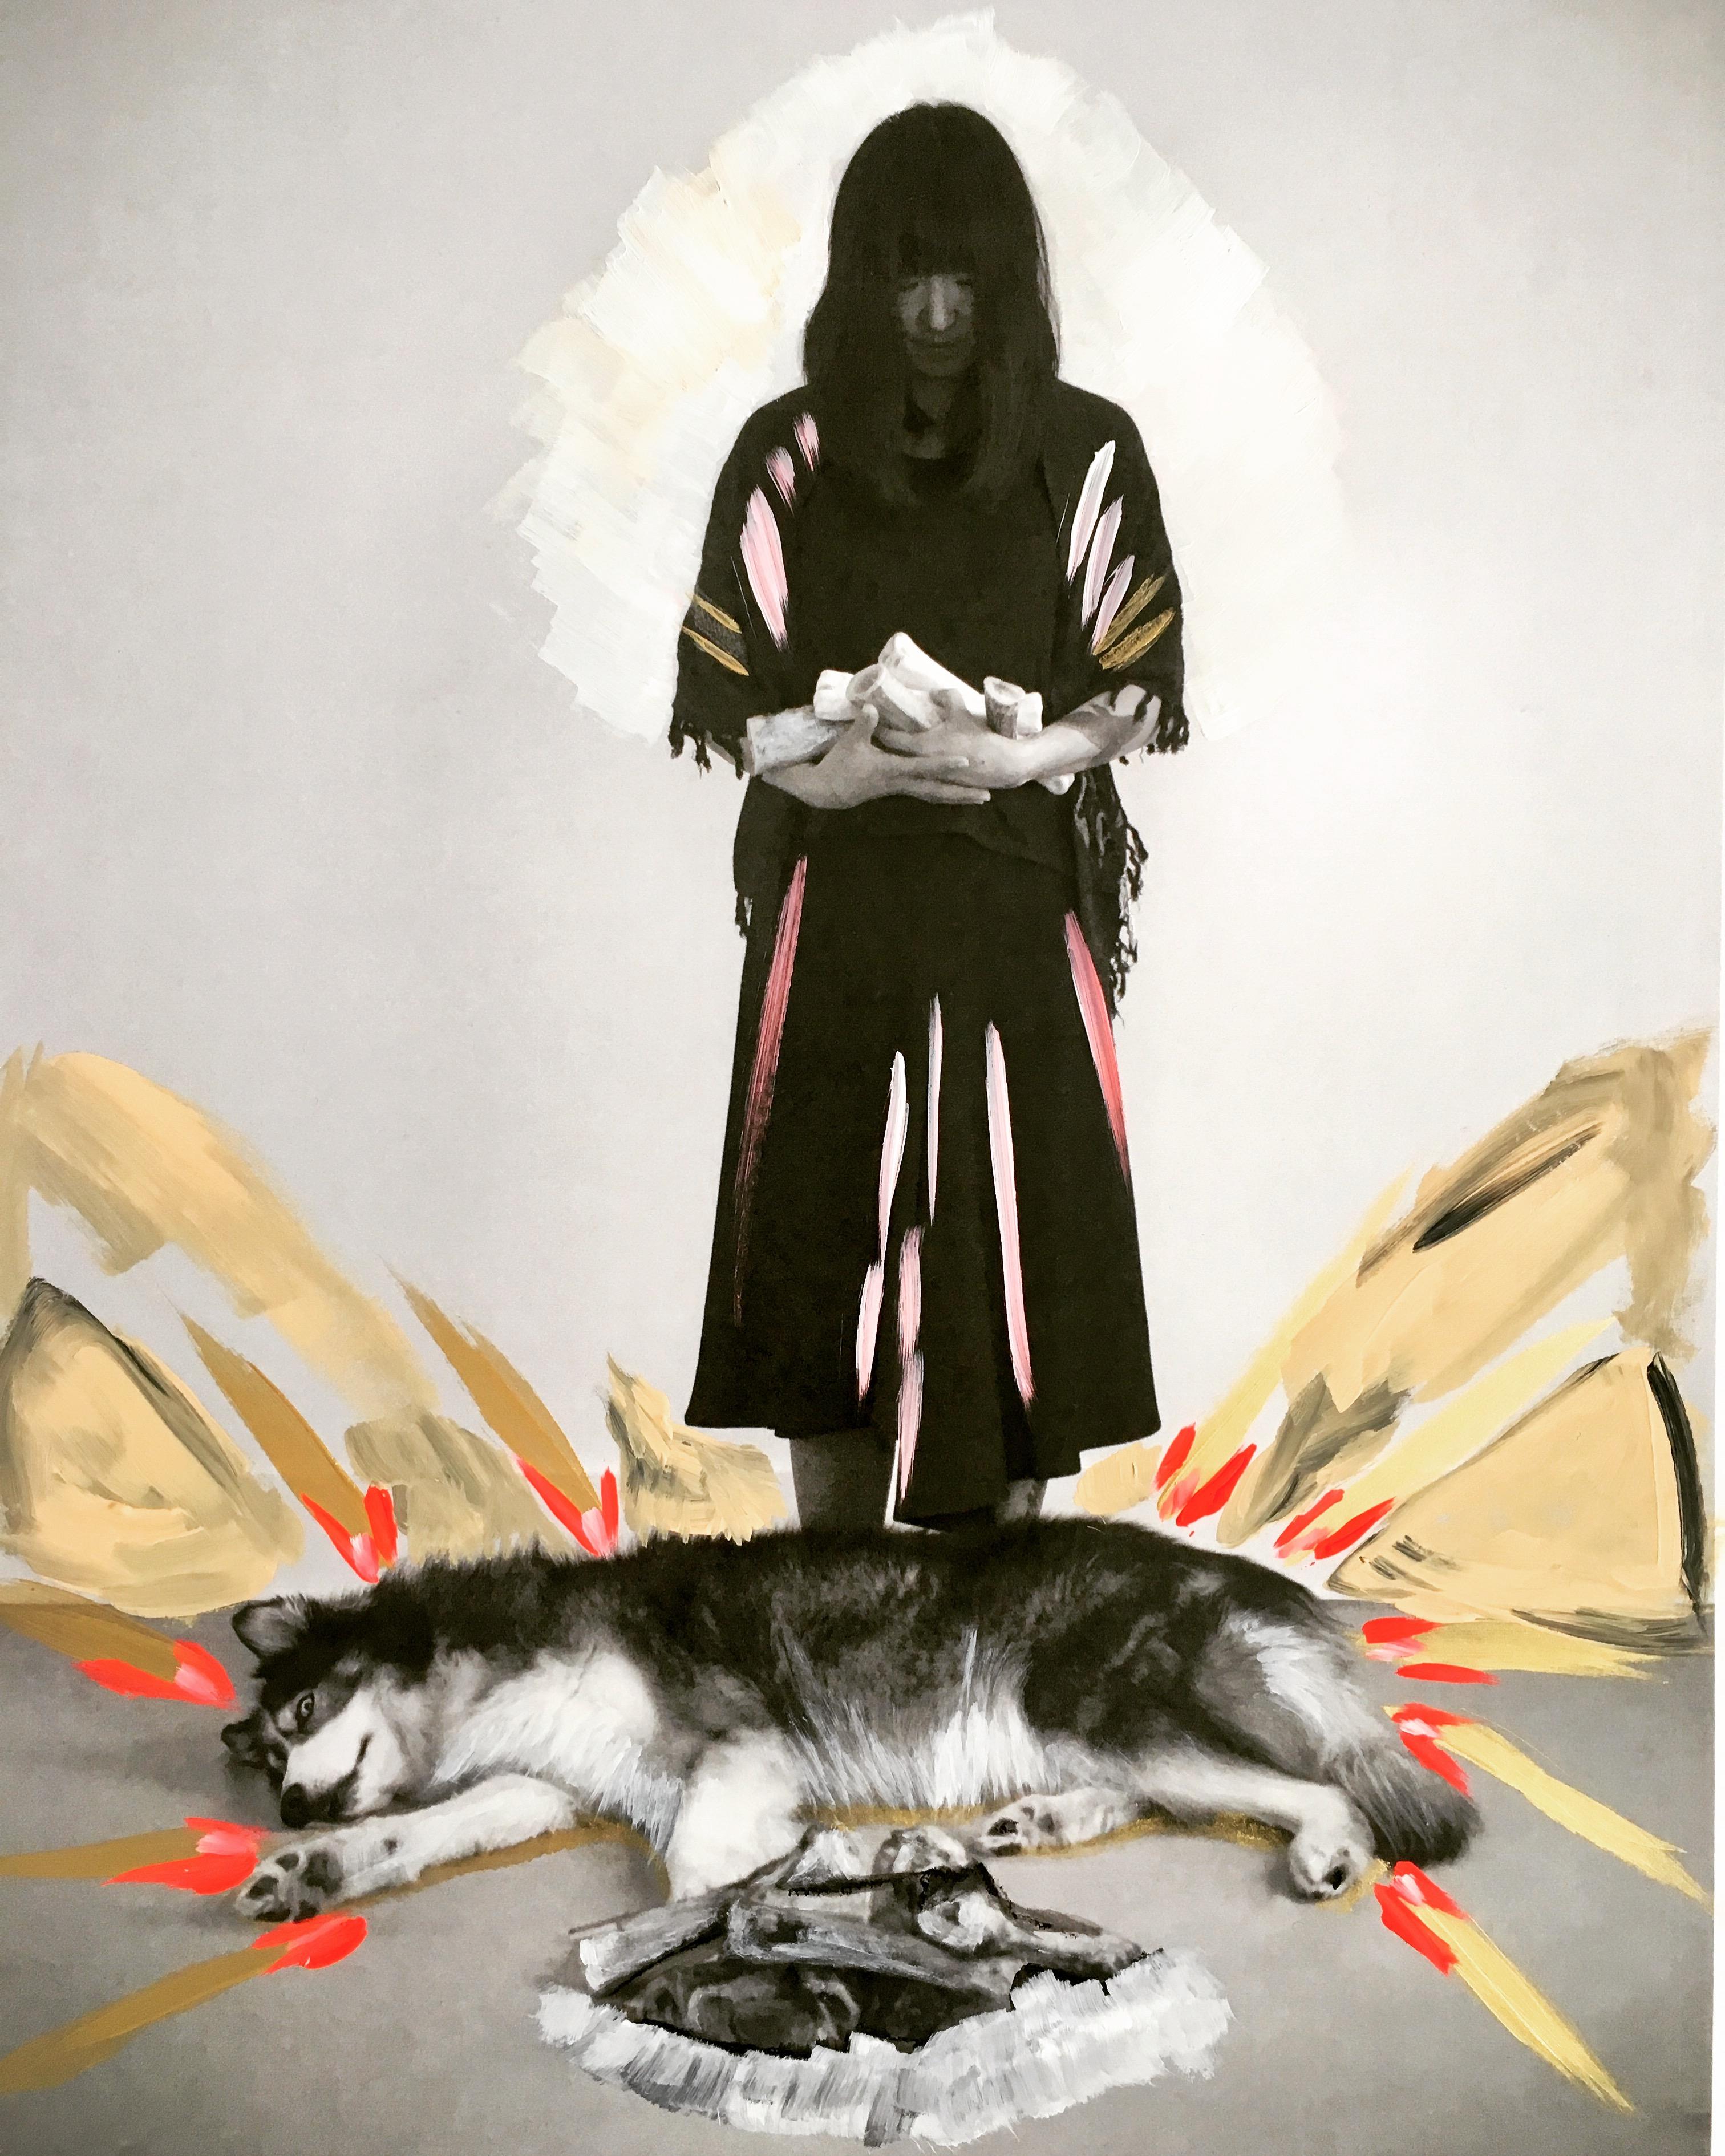 "La Loba," by artist June Kim is a unique artwork executed in acrylic paint and gouache over a photographic image also created by the artist. 

Artwork is currently unframed, framing options are available, please inquire.

New York- based artist